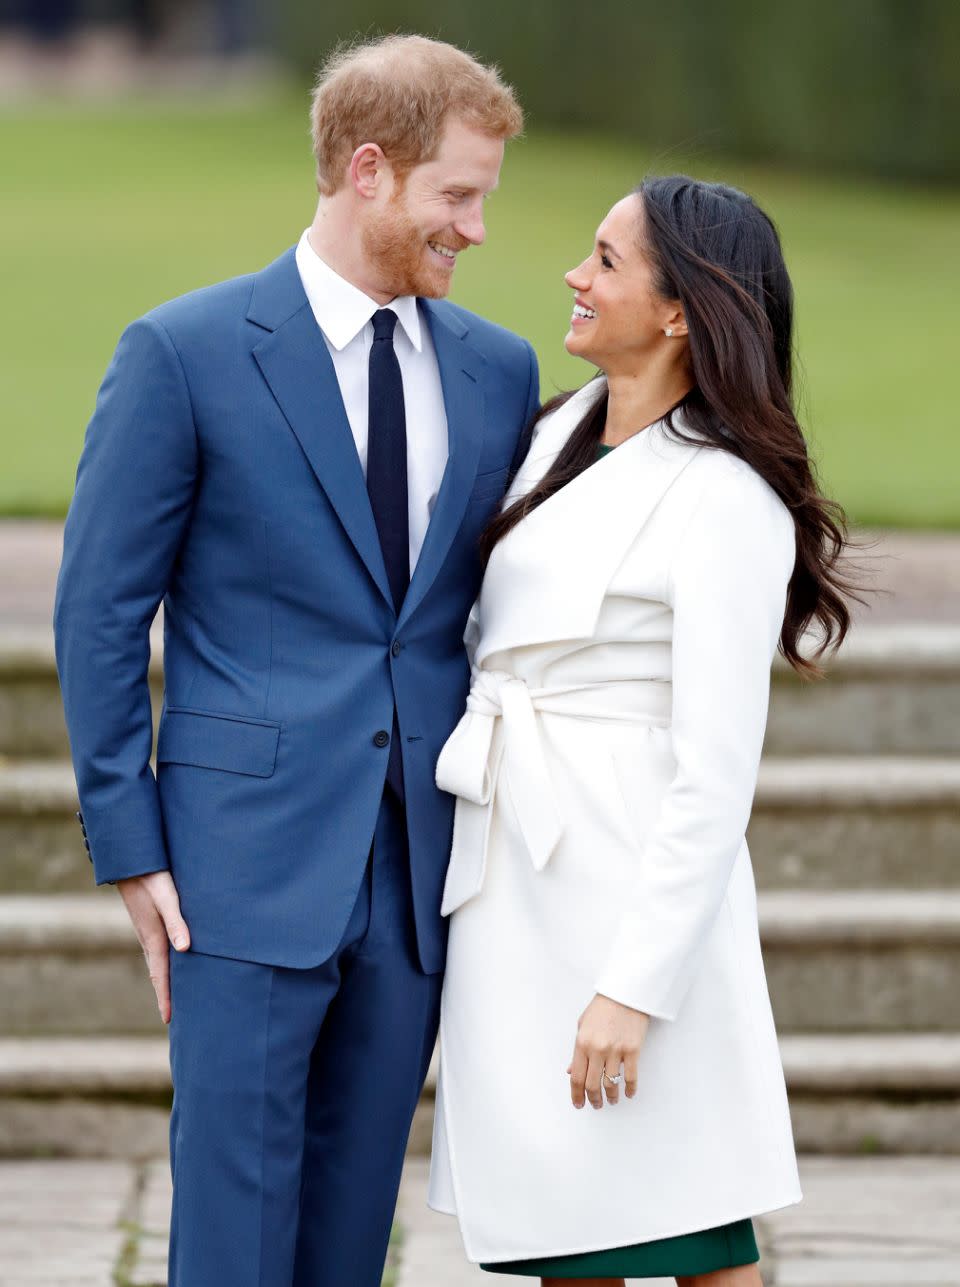 Prince Harry and Meghan Markle announced their engagement last Monday. Source: Getty